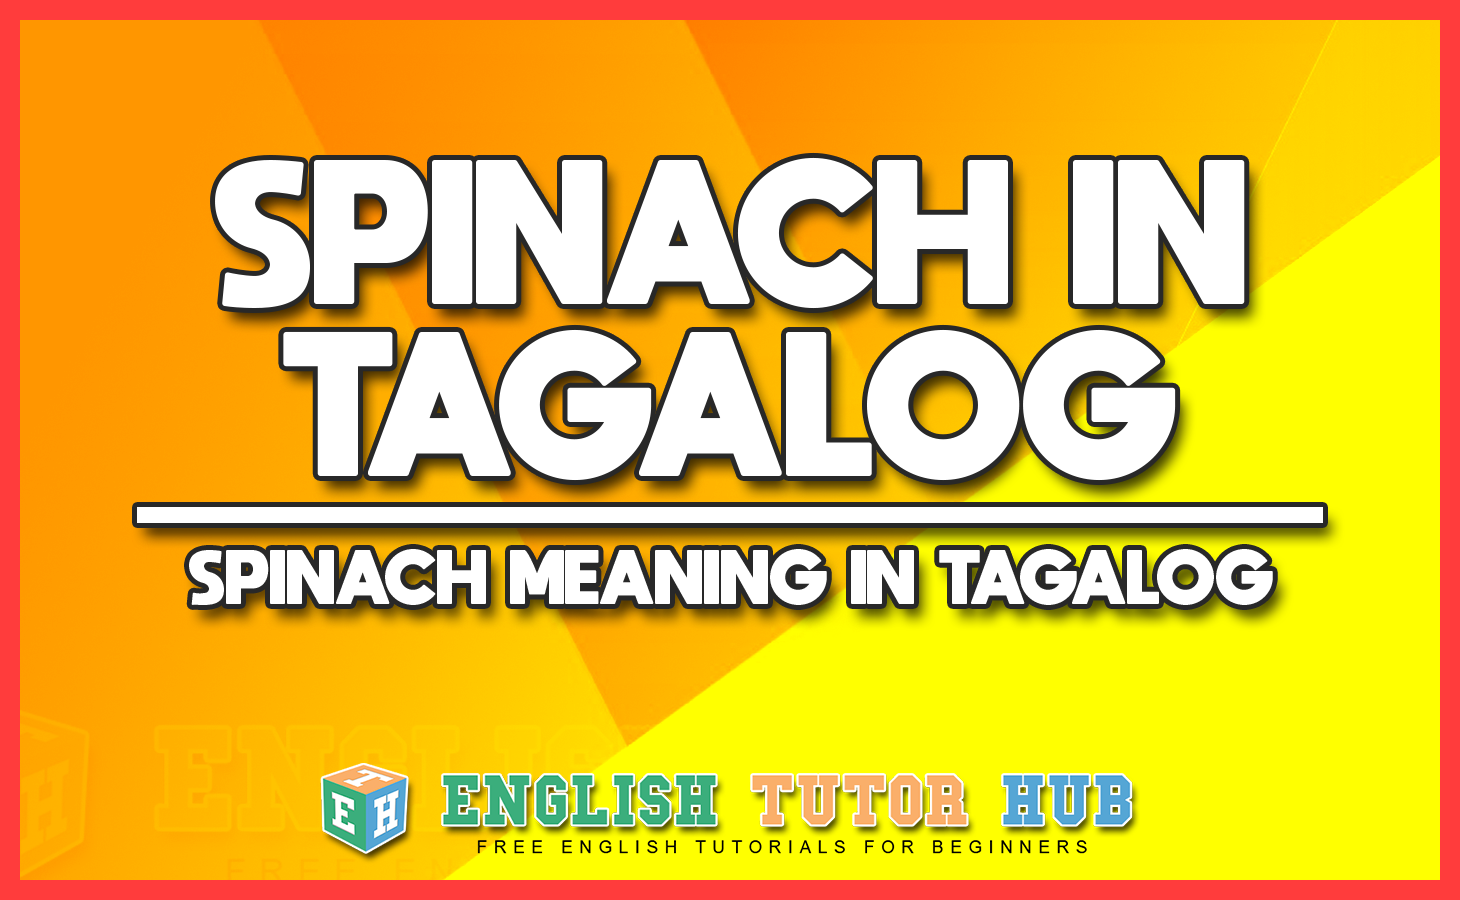 Spinach in Tagalog - Spinach Meaning in Tagalog